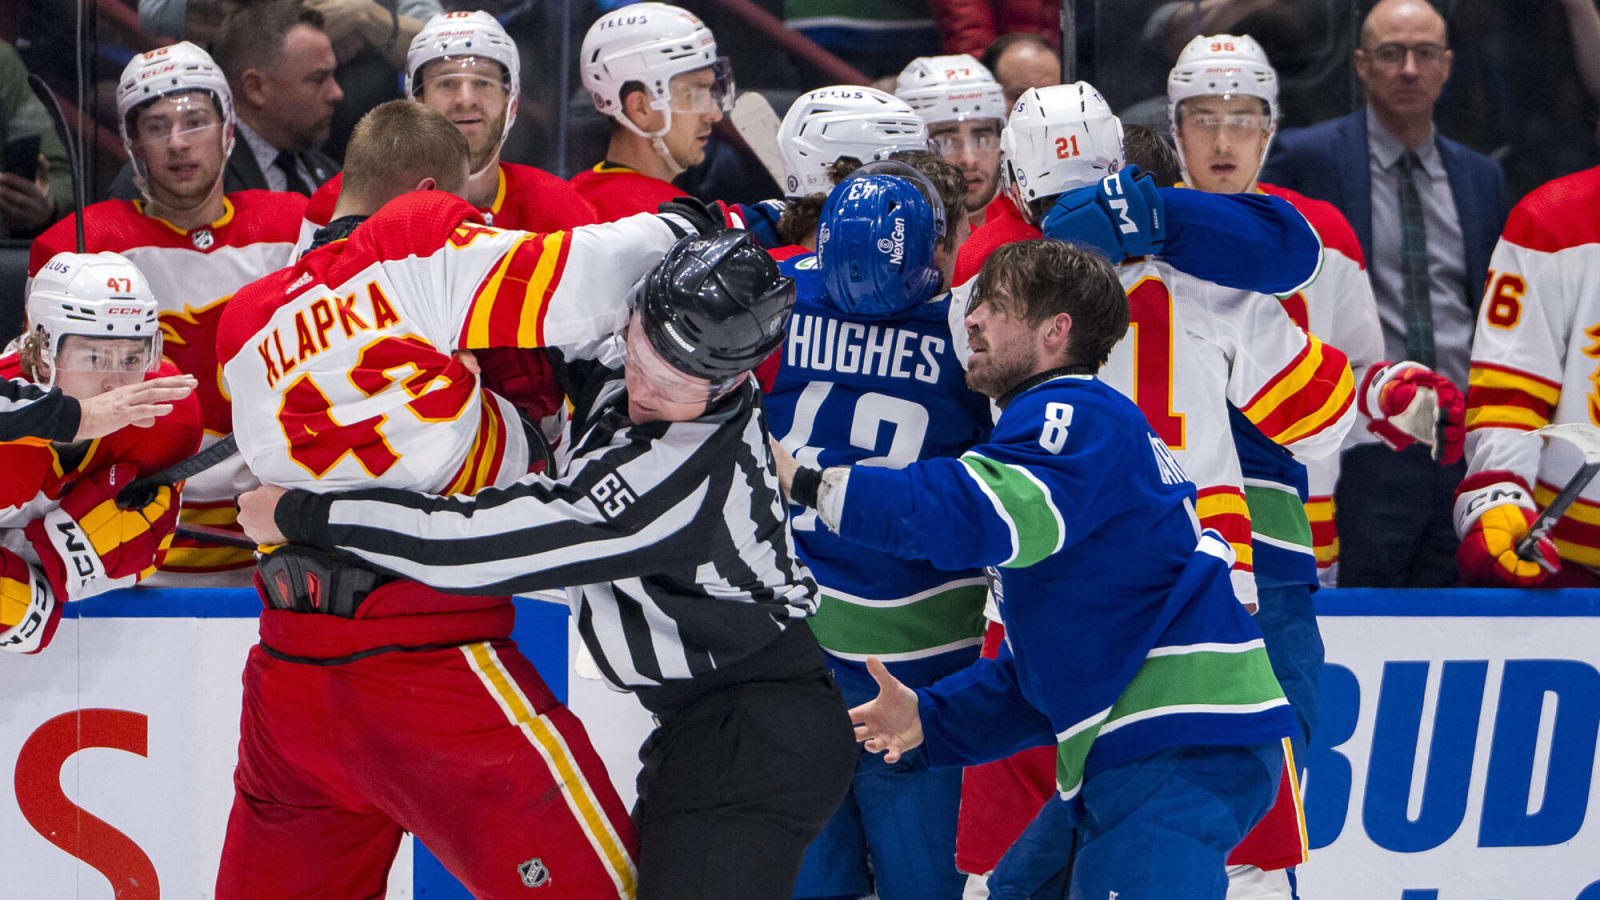  Vancouver Canucks clinch Pacific Division title with 4-1 win over Flames